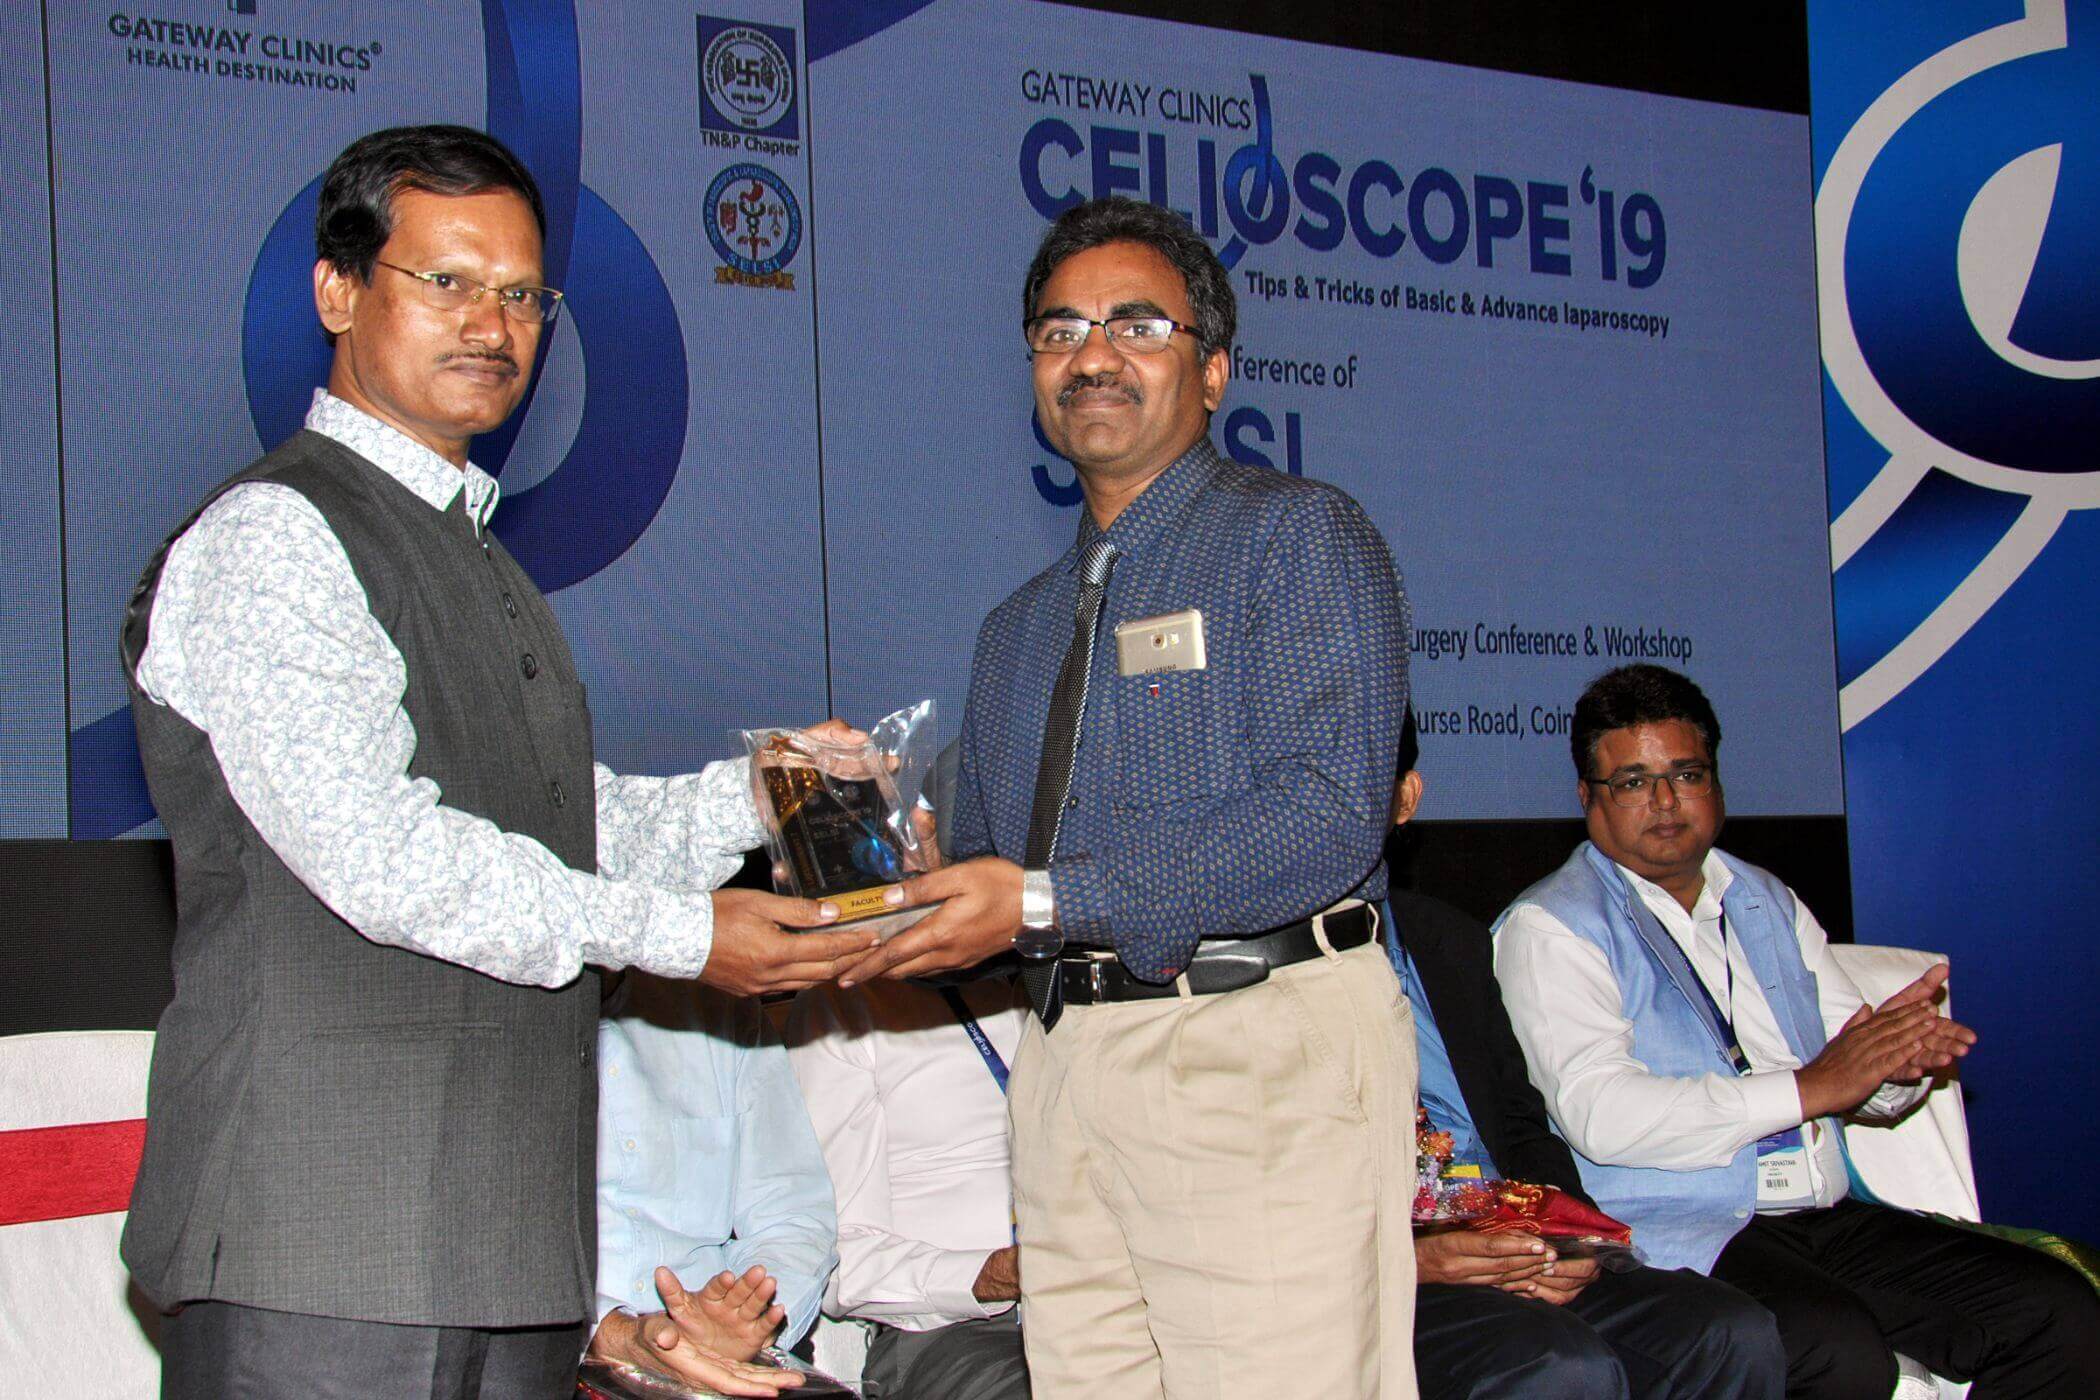 best laparoscopic surgeon in Hyderabad receiving an award for being best in the field